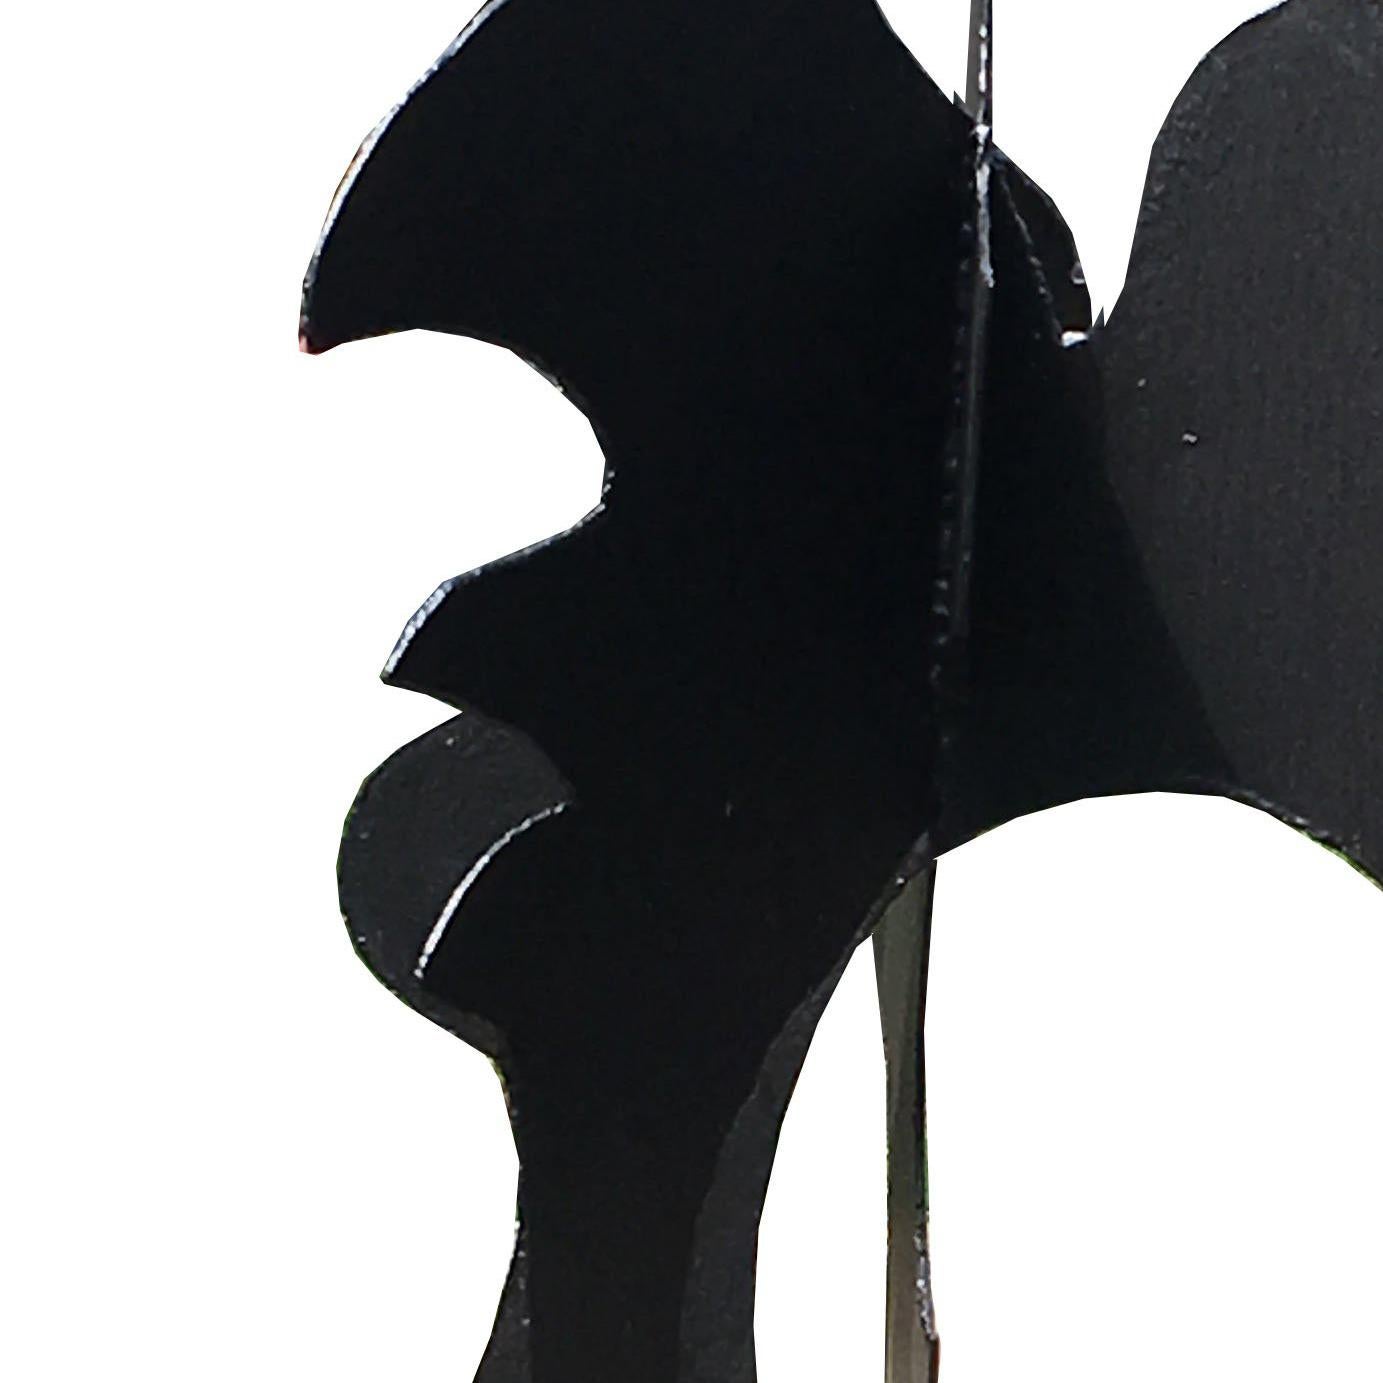 Convergence - Black Abstract Sculpture by David Hayes